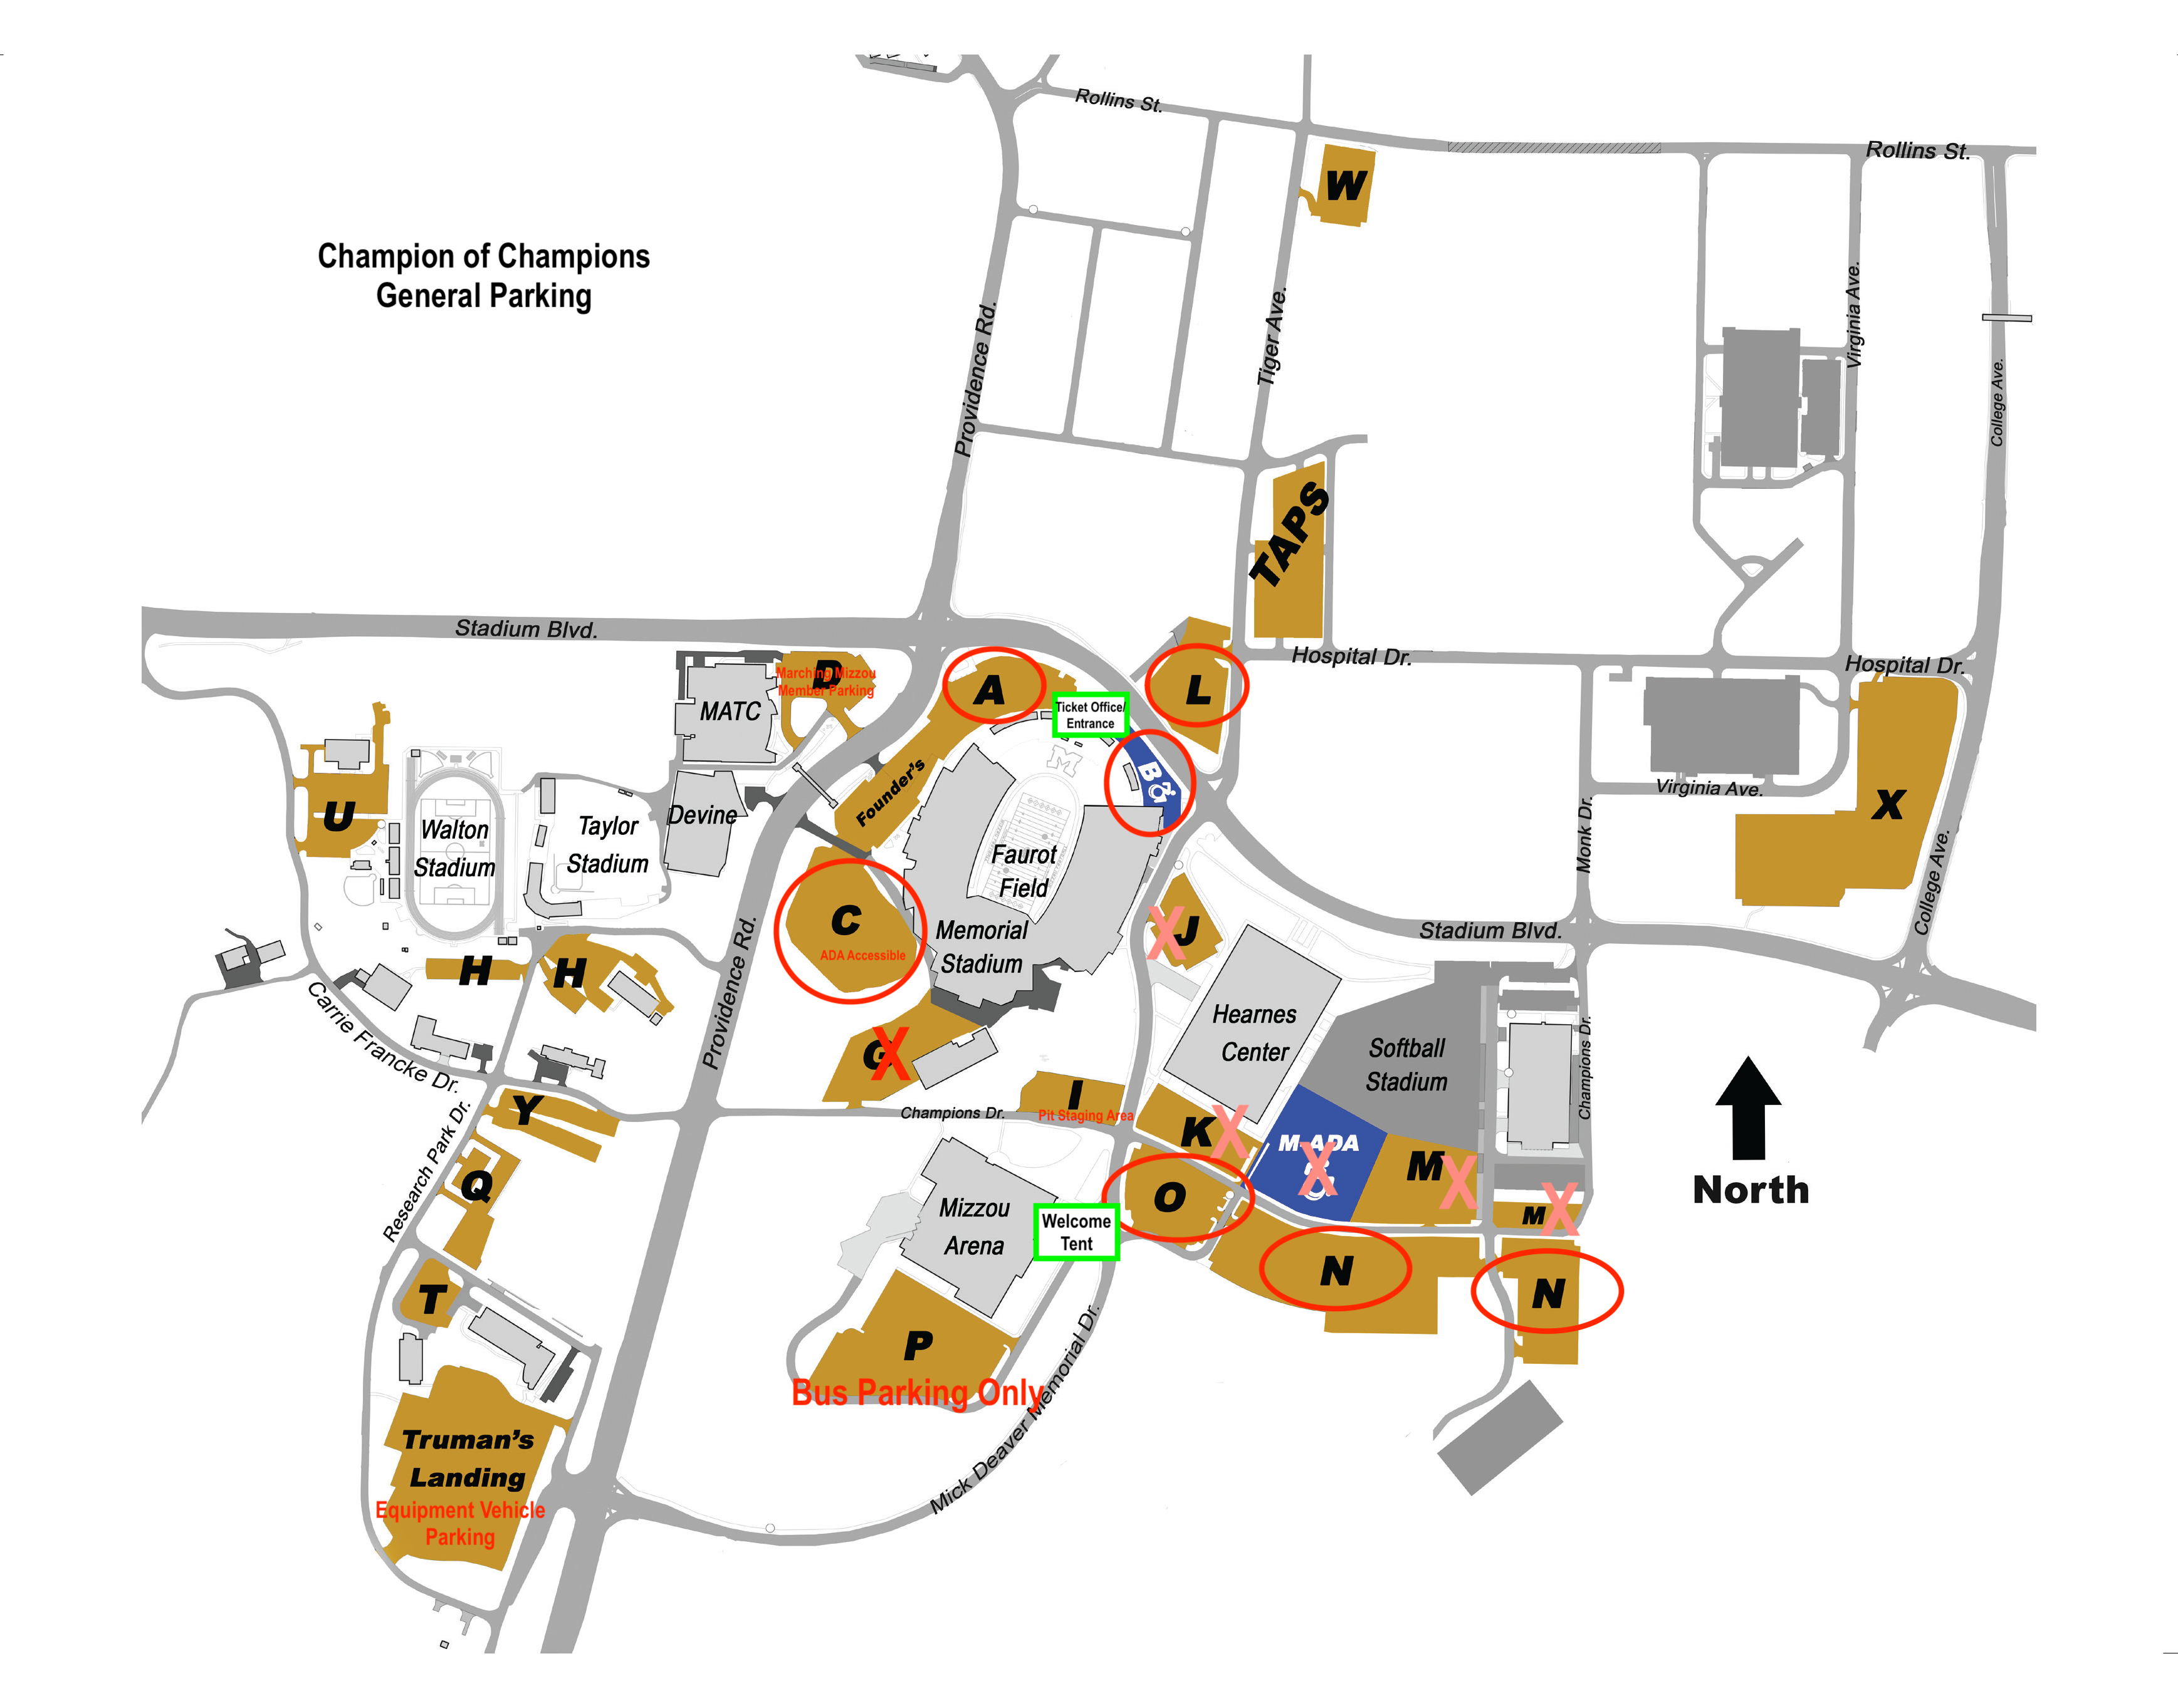 Champion of Champions General Parking Map